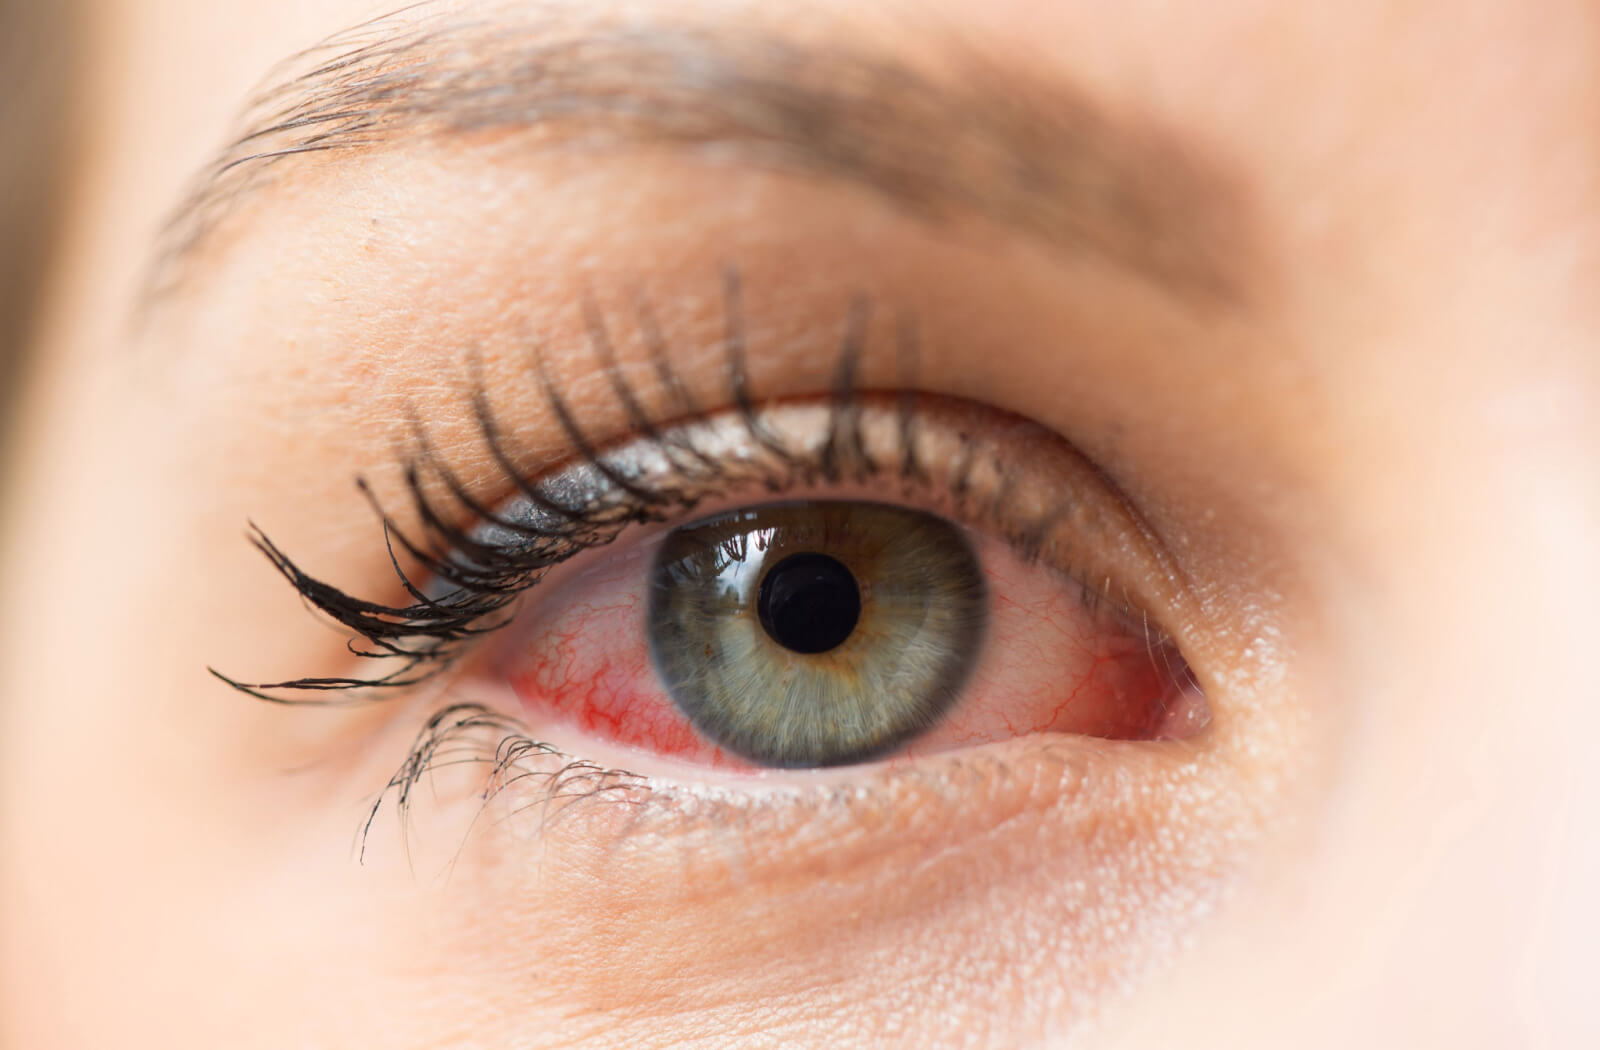 a close up of a woman's eye, which is very red due to dry eye